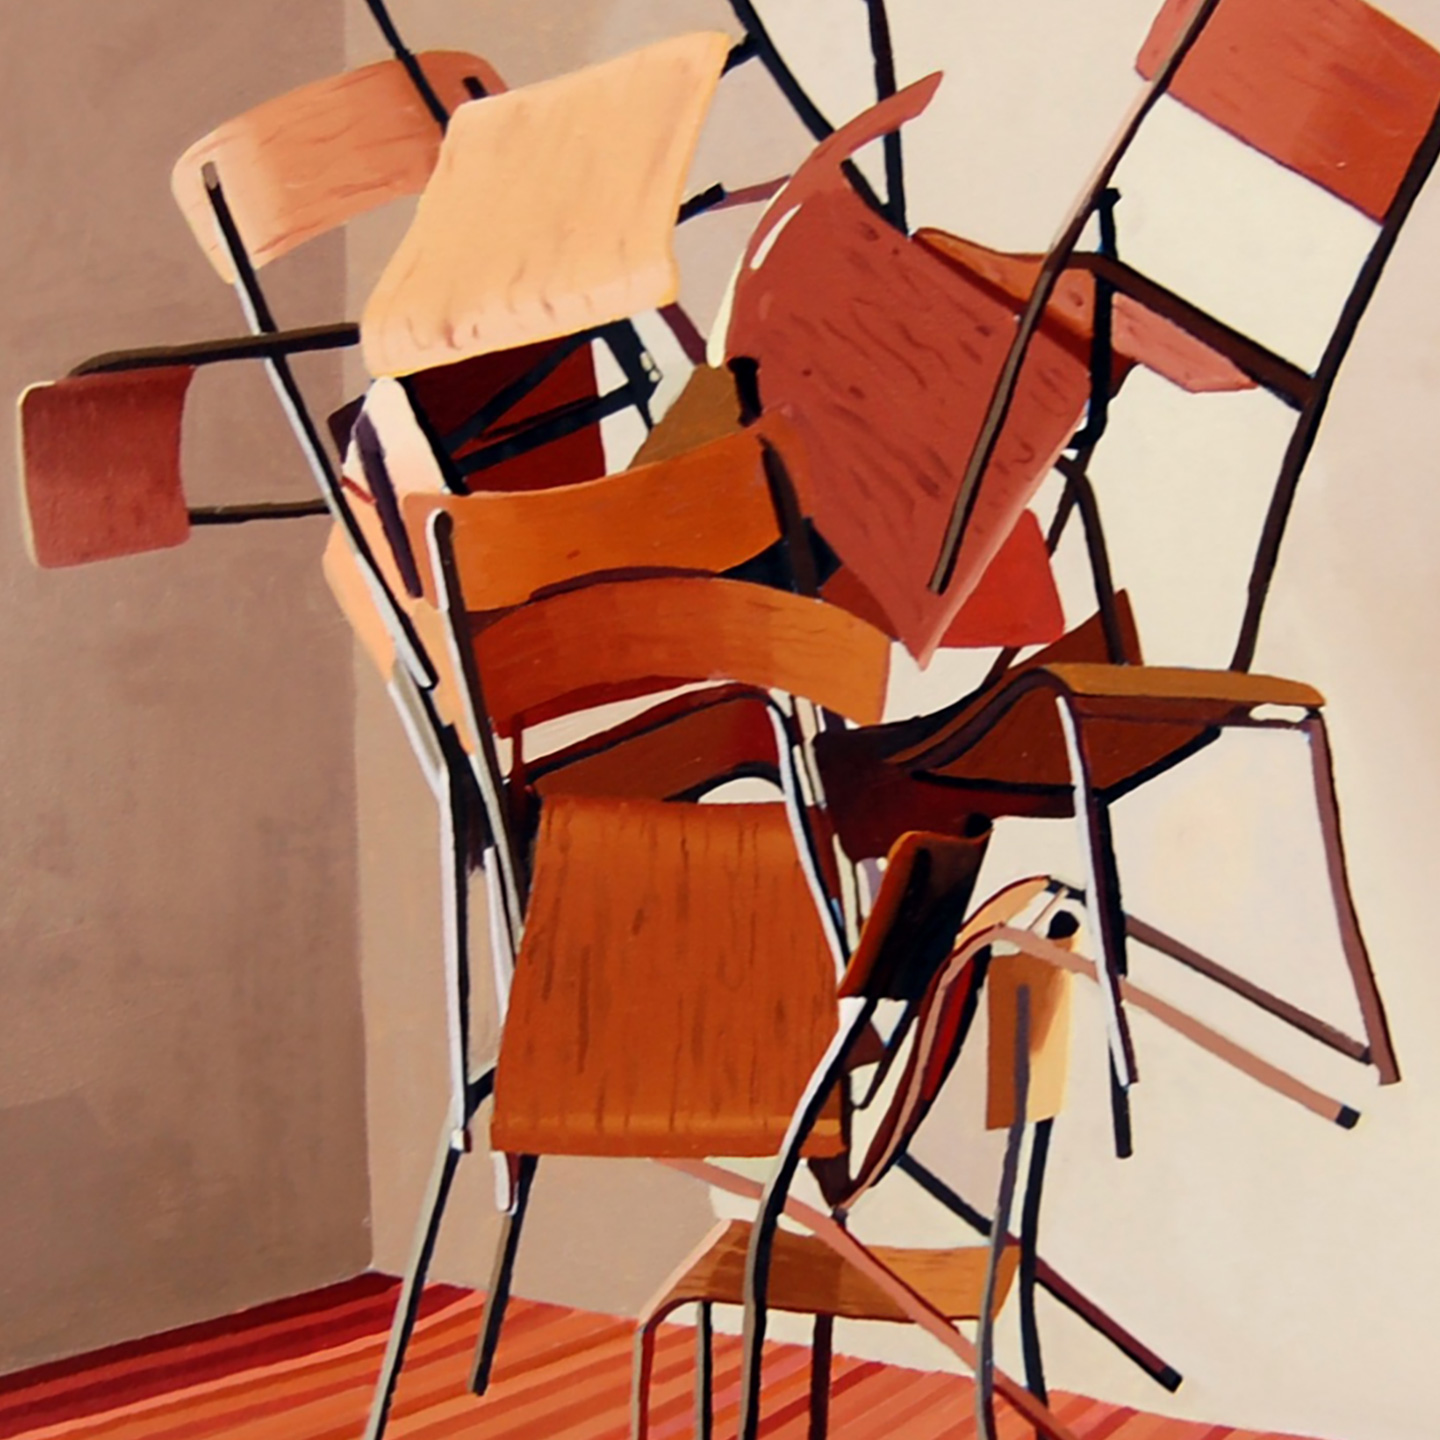 Group of brown chairs stacked atop one another at odd angles